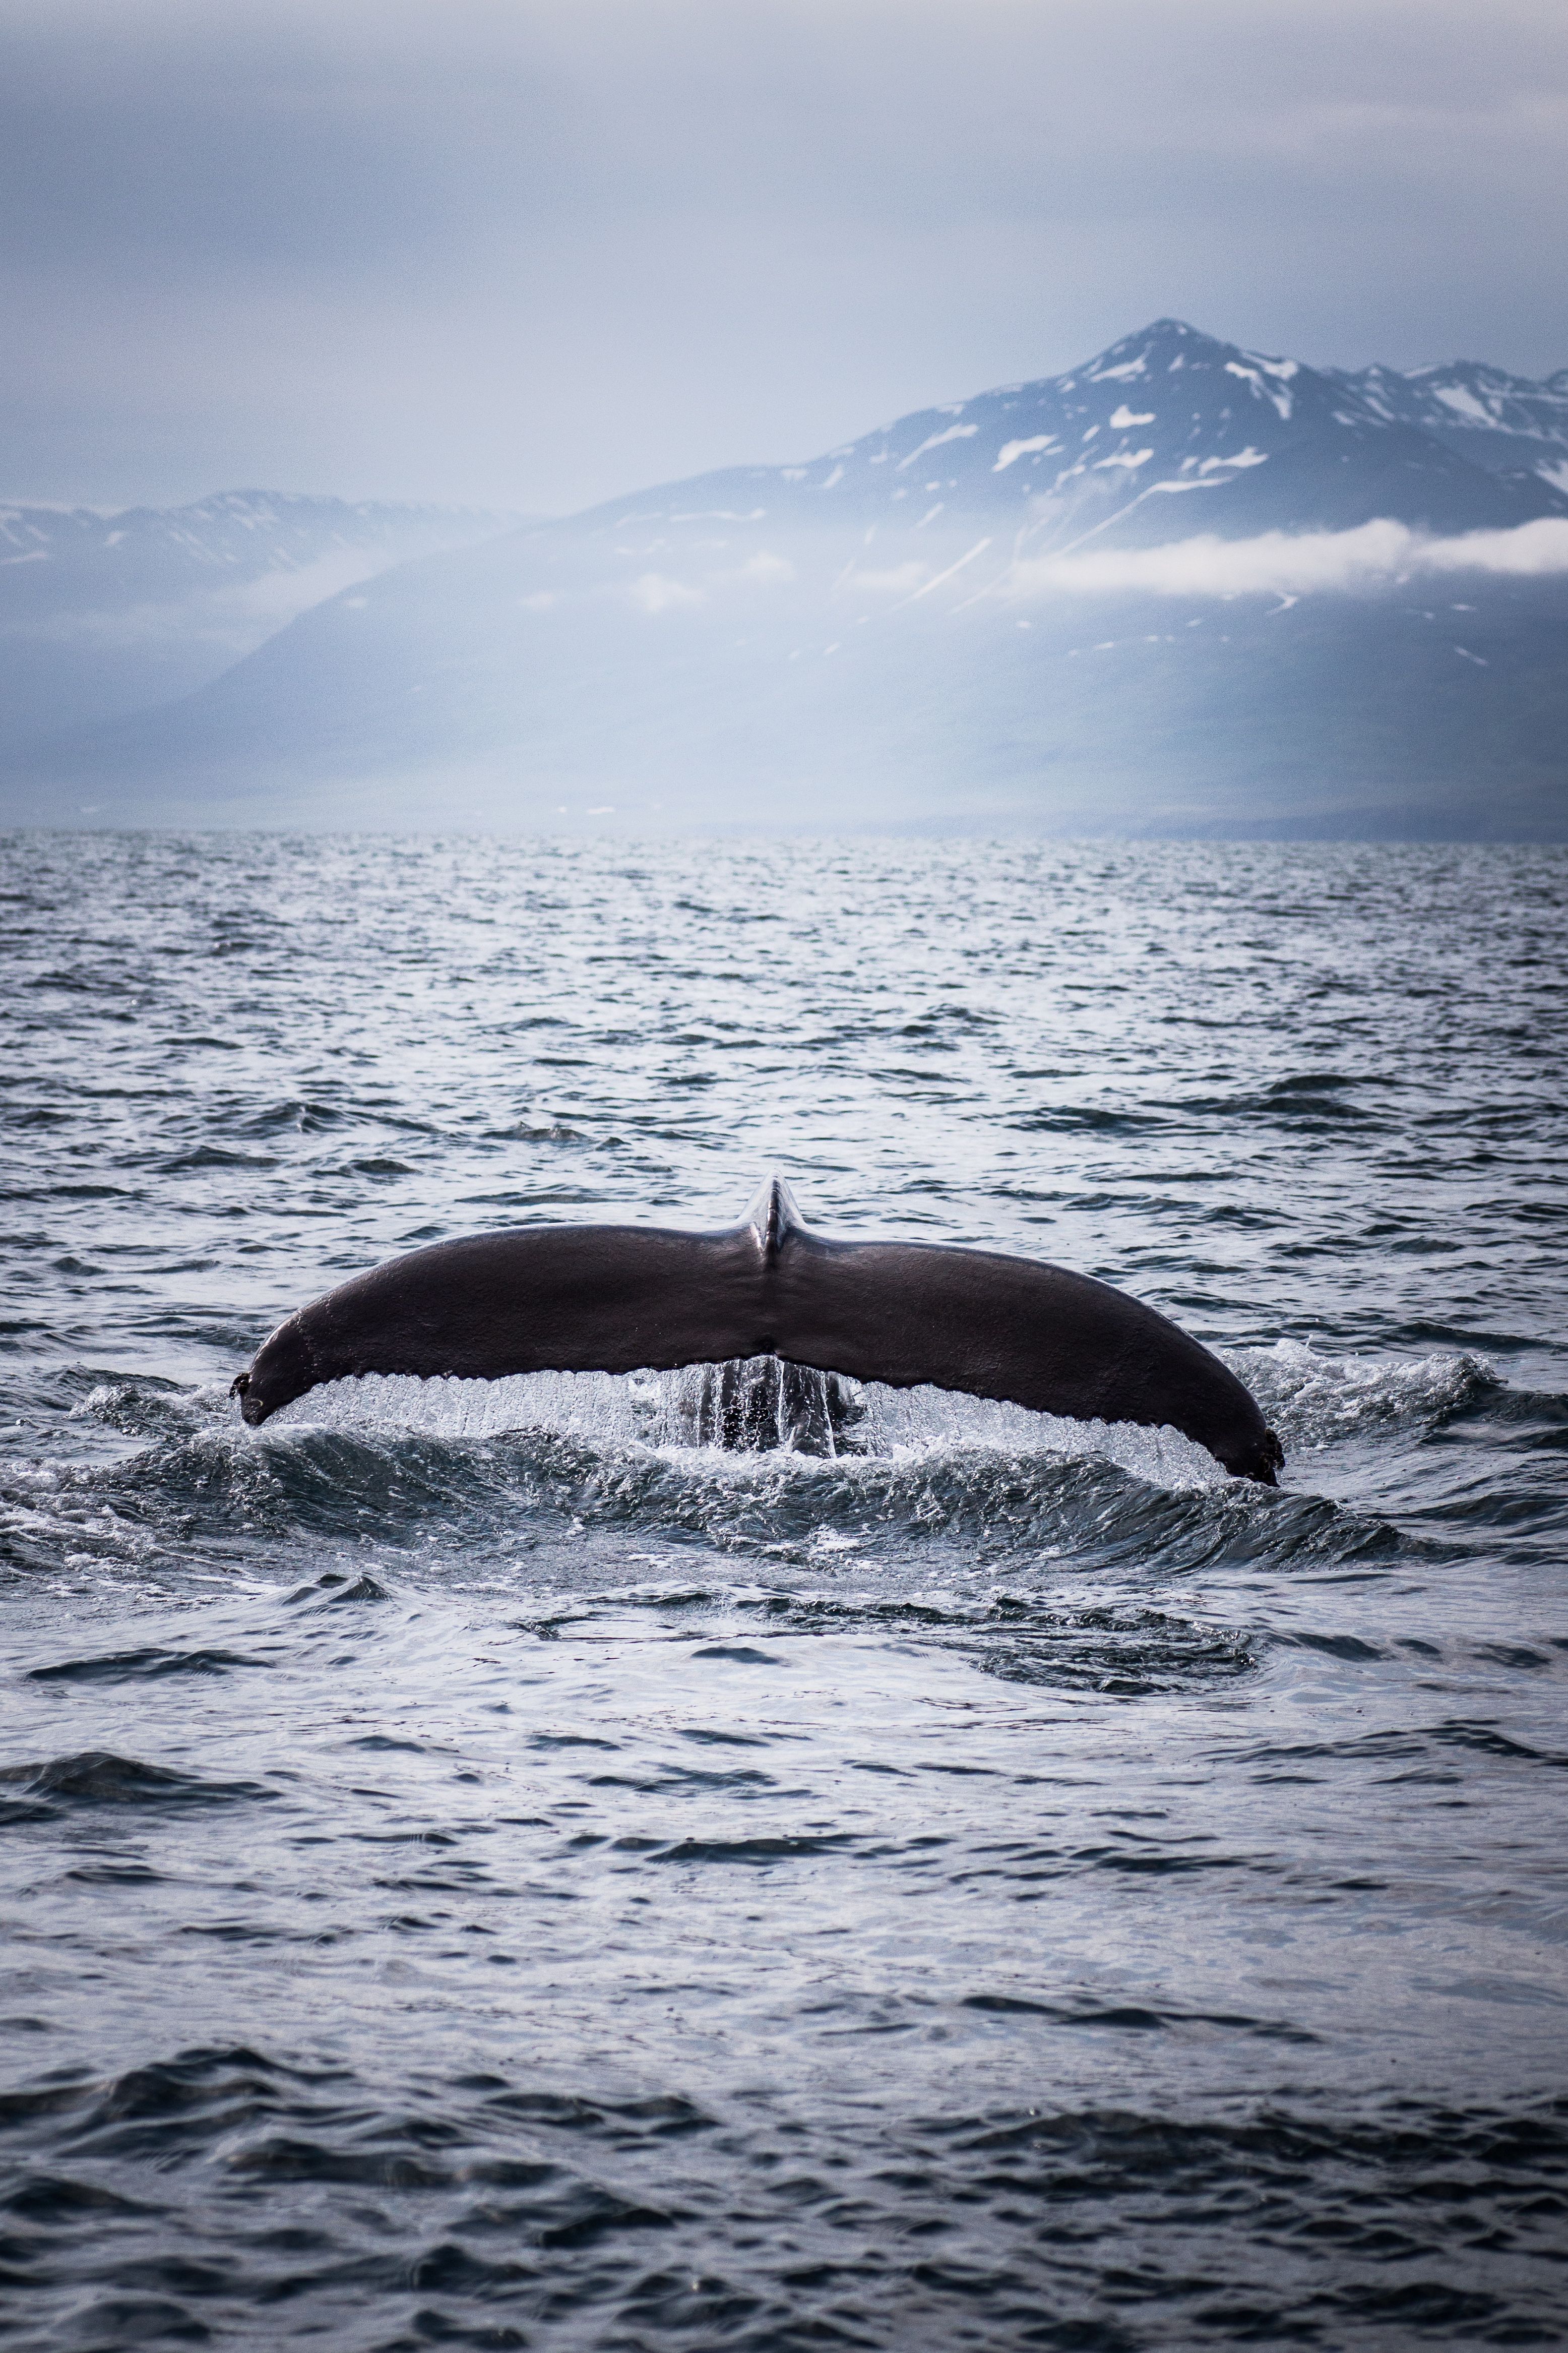 whales 4K wallpaper for your desktop or mobile screen free